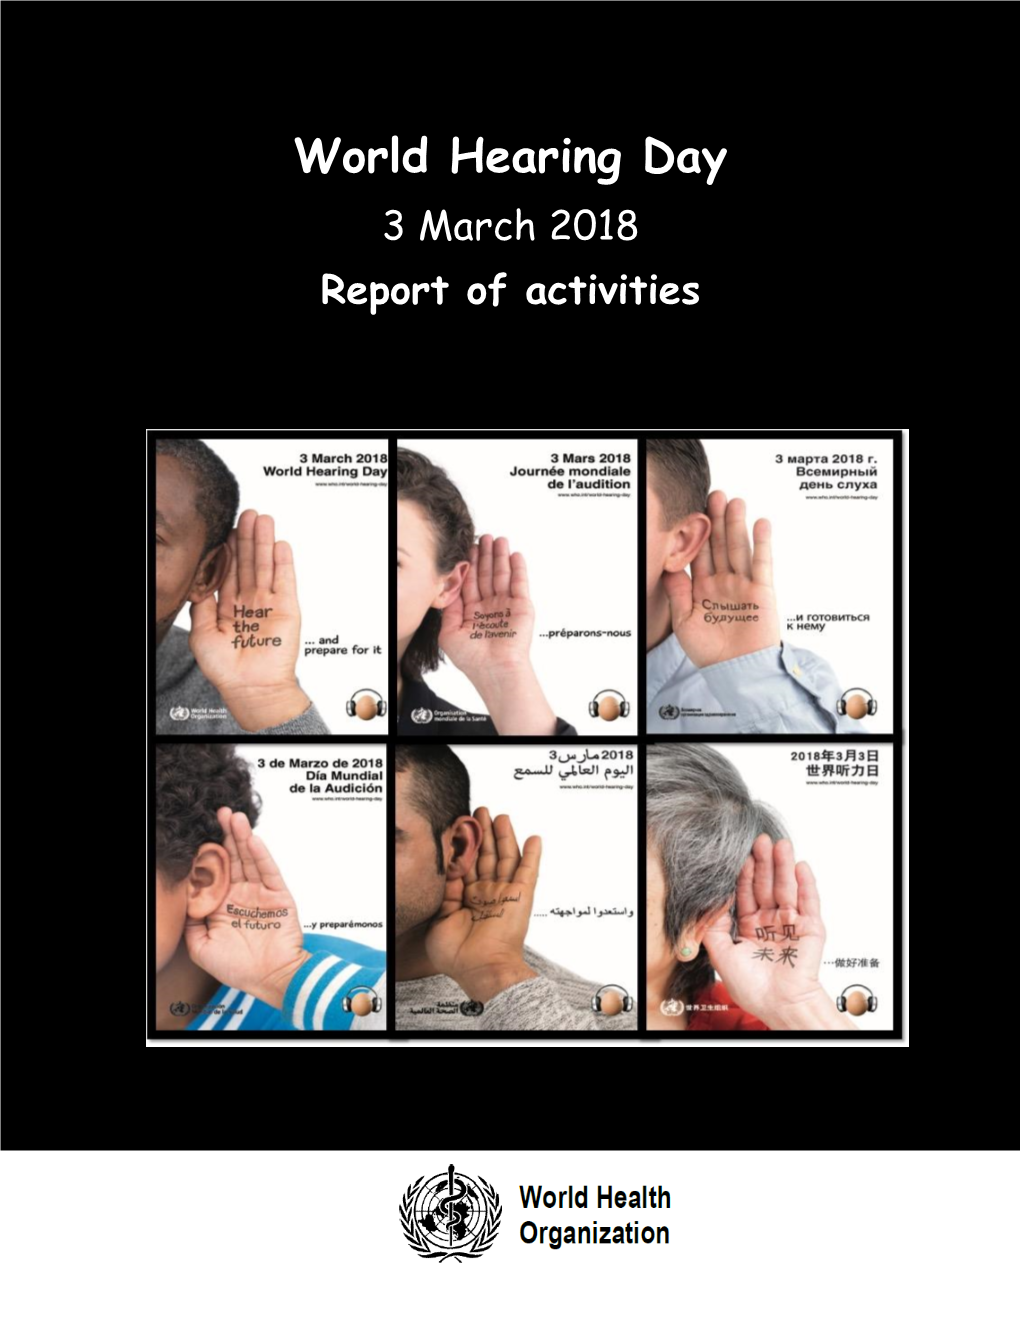 World Hearing Day 3 March 2018 Report of Activities